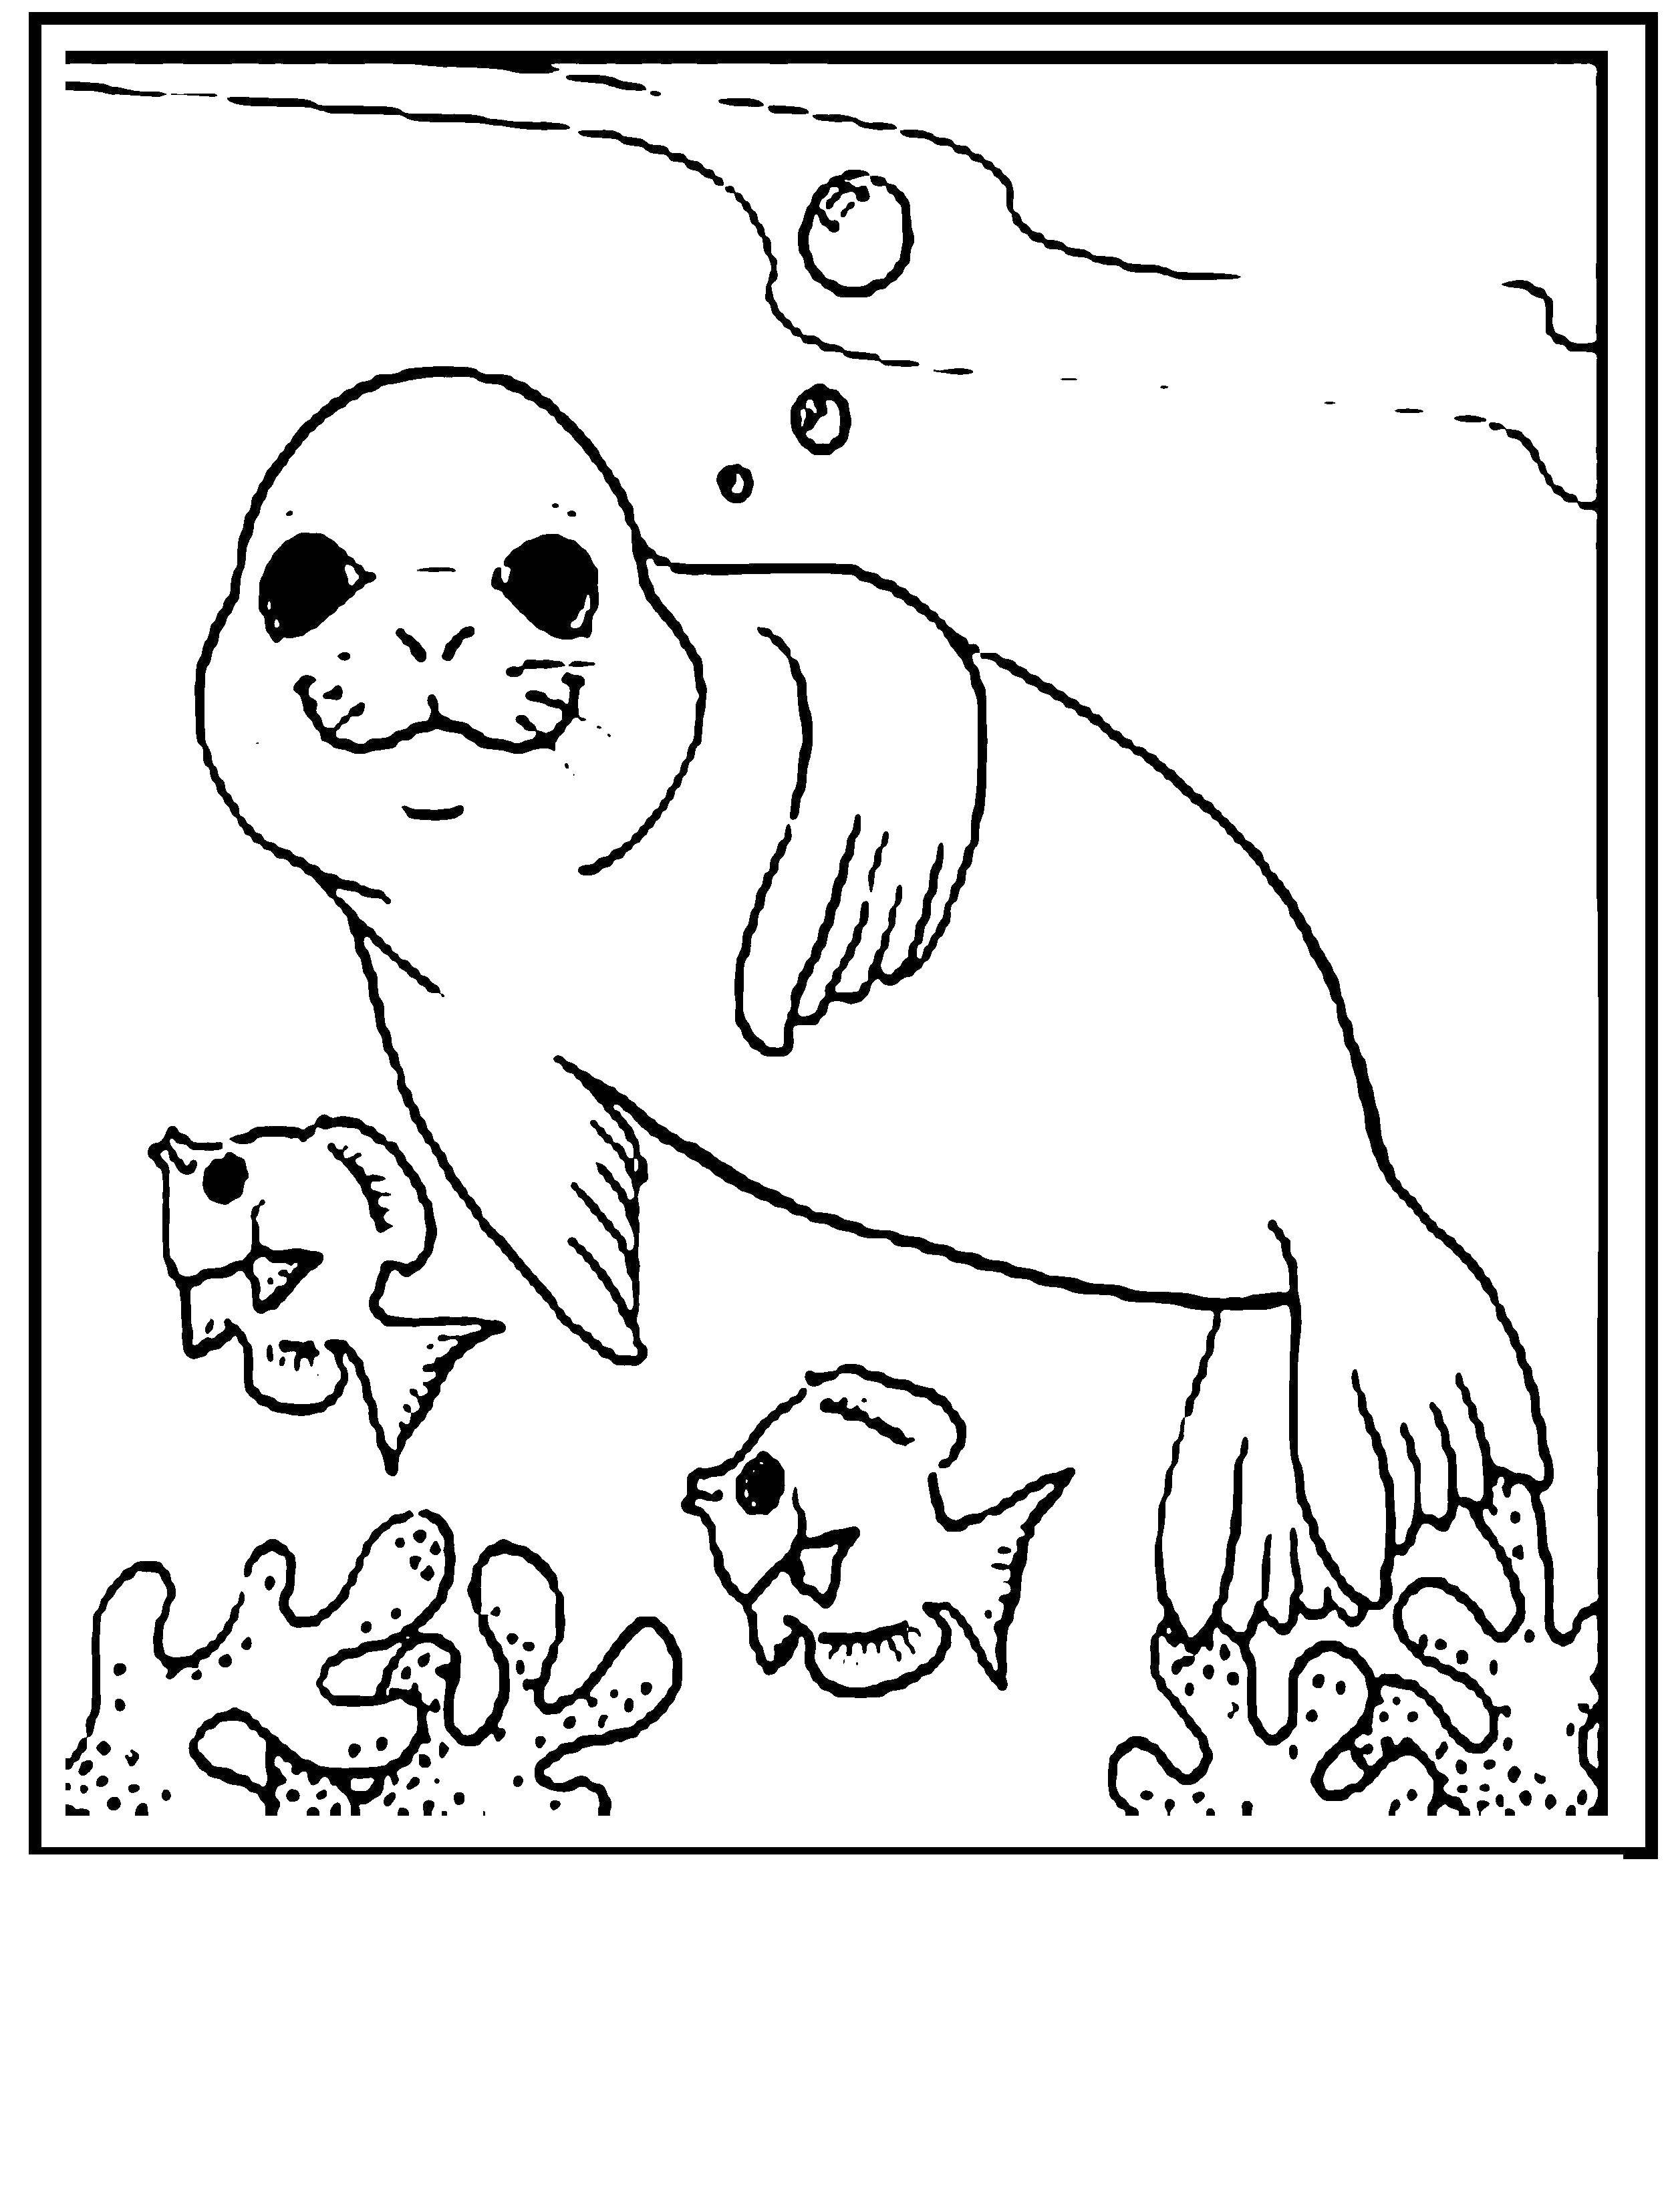 Coloring Seal. Category The ocean. Tags:  seals, walrus, lion.